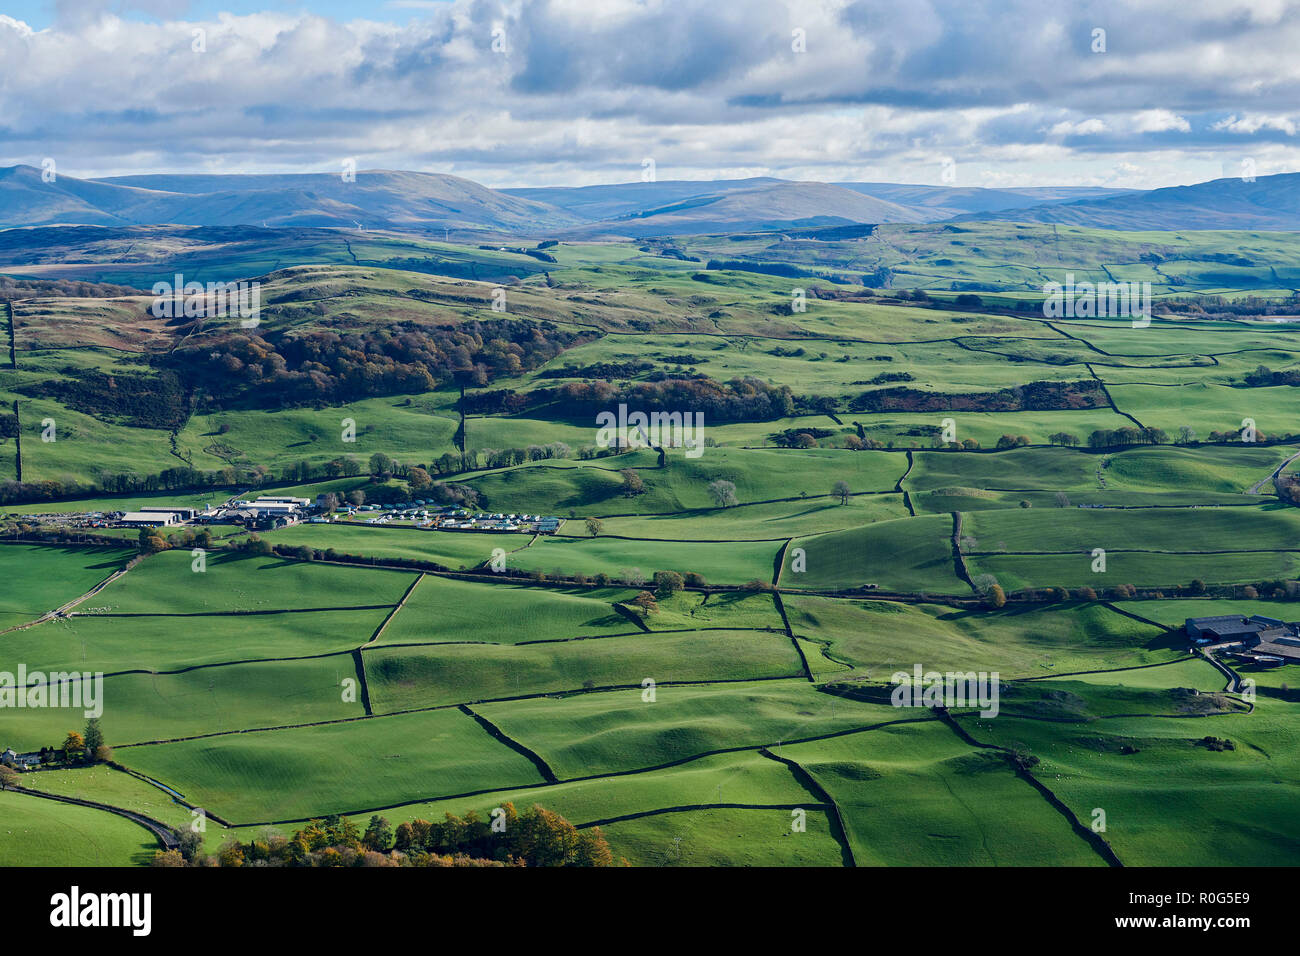 Cumbrian field landscape, shot from the air, in the Penrith area, North West England, UK Stock Photo